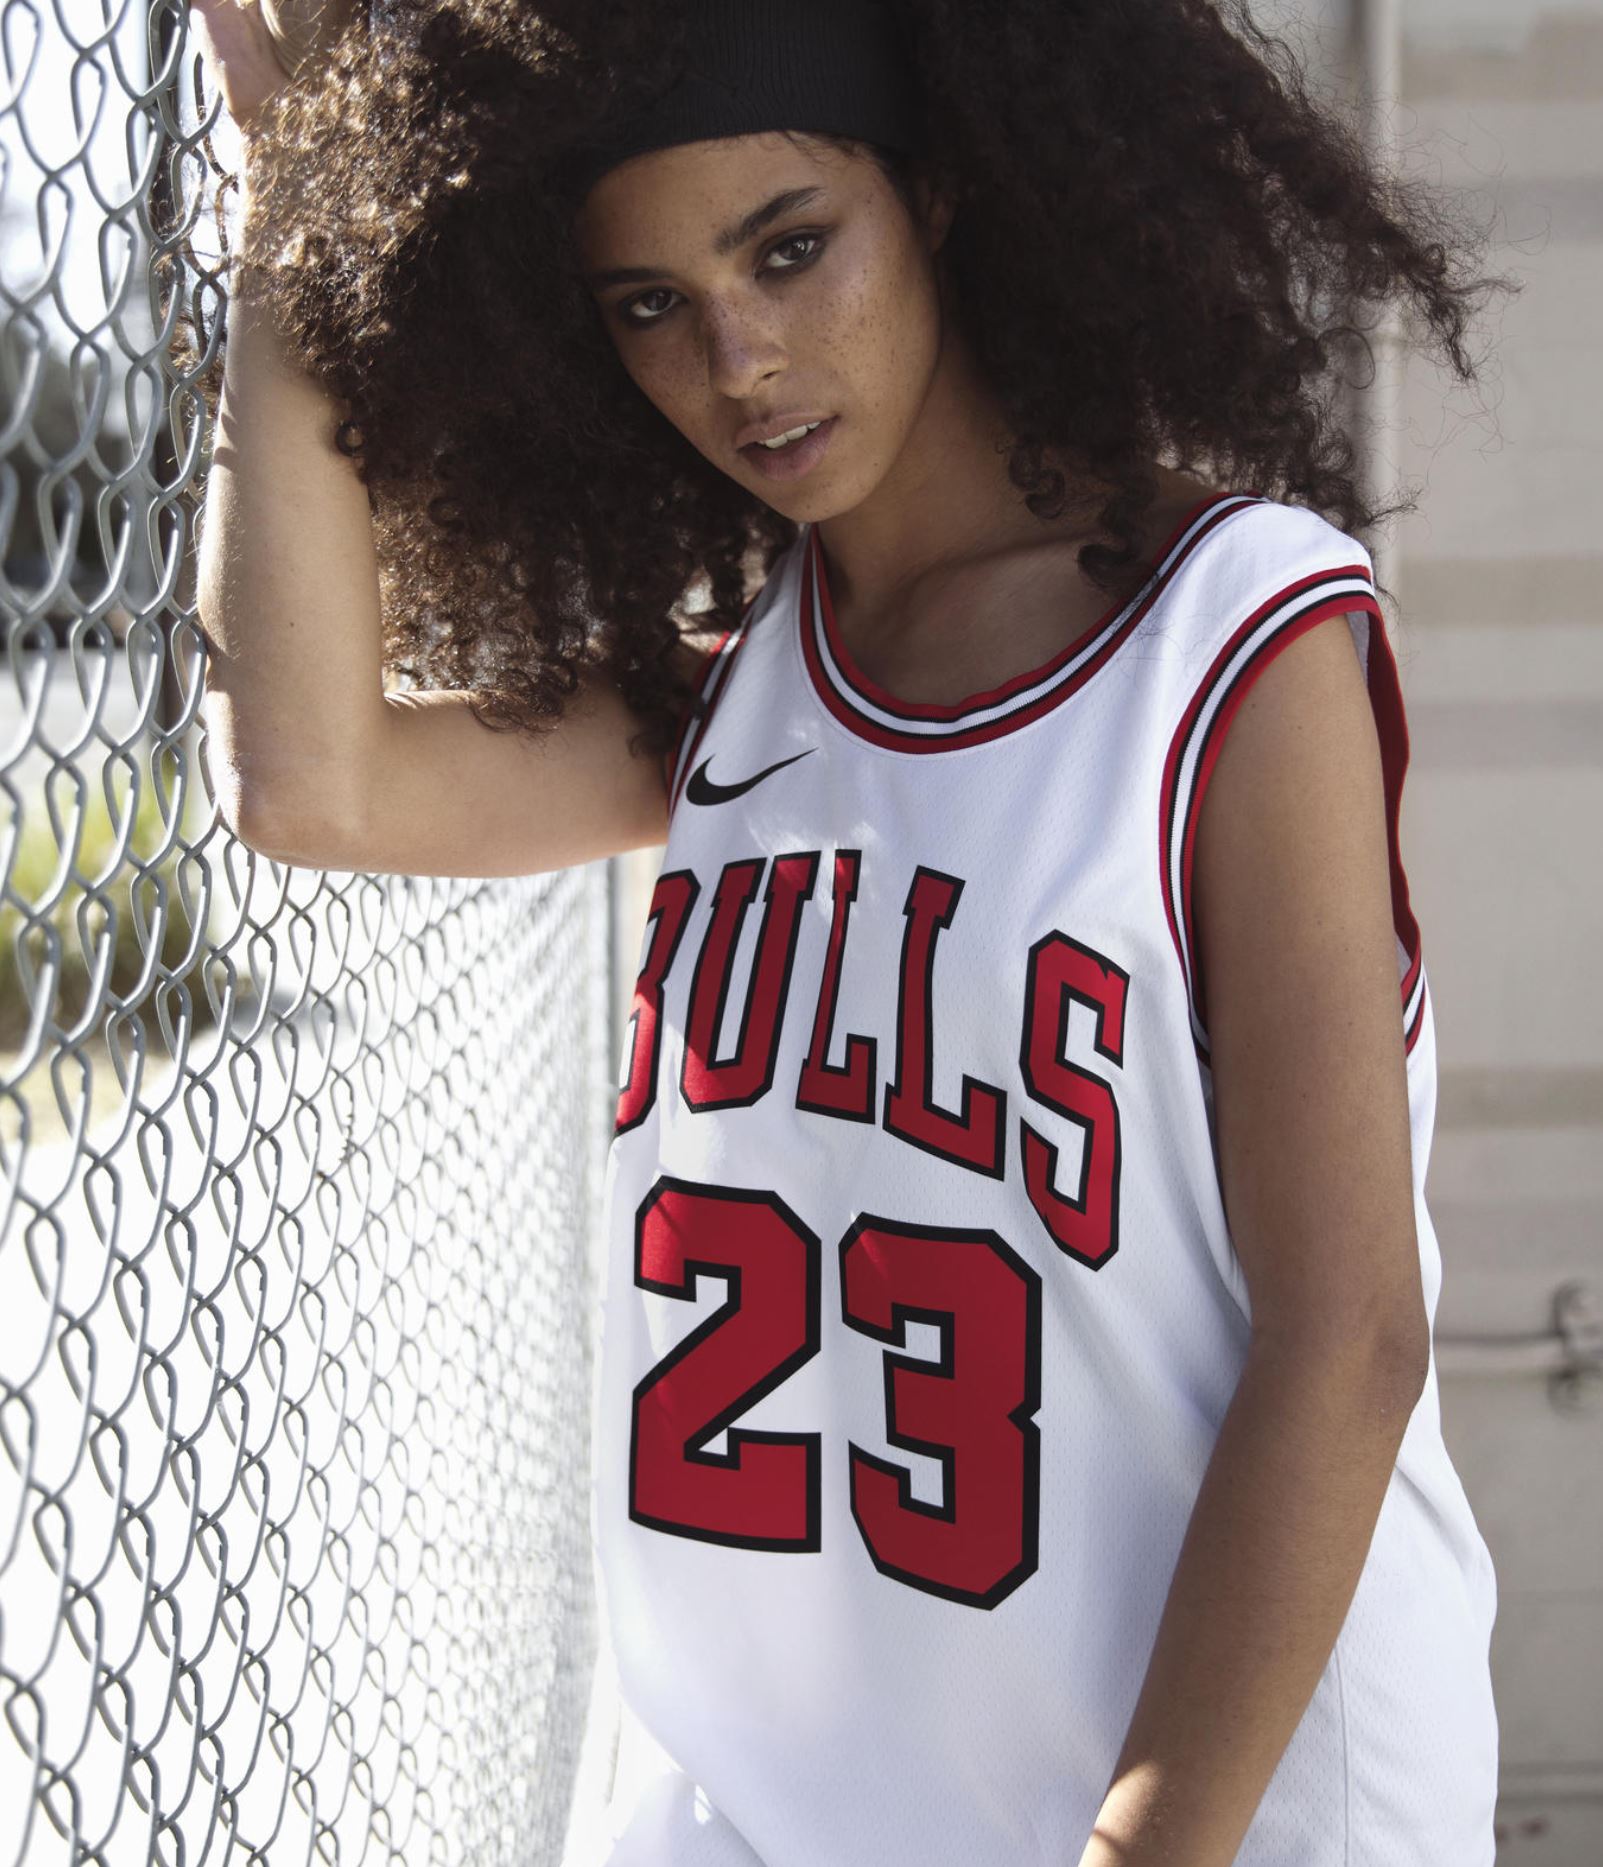 Nike Unveils Limited Edition Michael Jordan Bulls Jerseys to Honor the Last  Shot - WearTesters